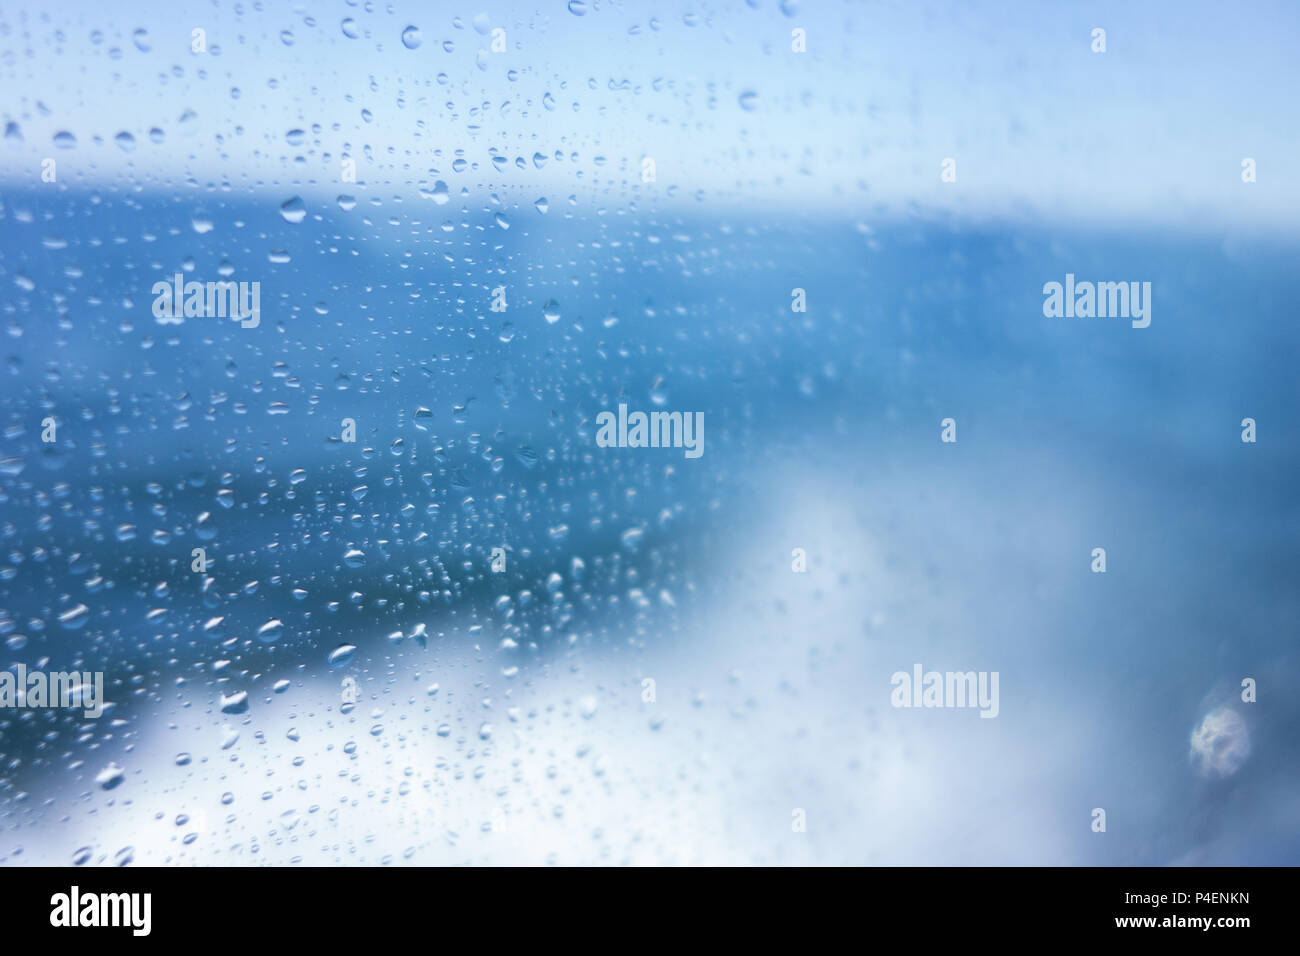 Water droplets on the window of a ship, with a blue sea background Stock Photo